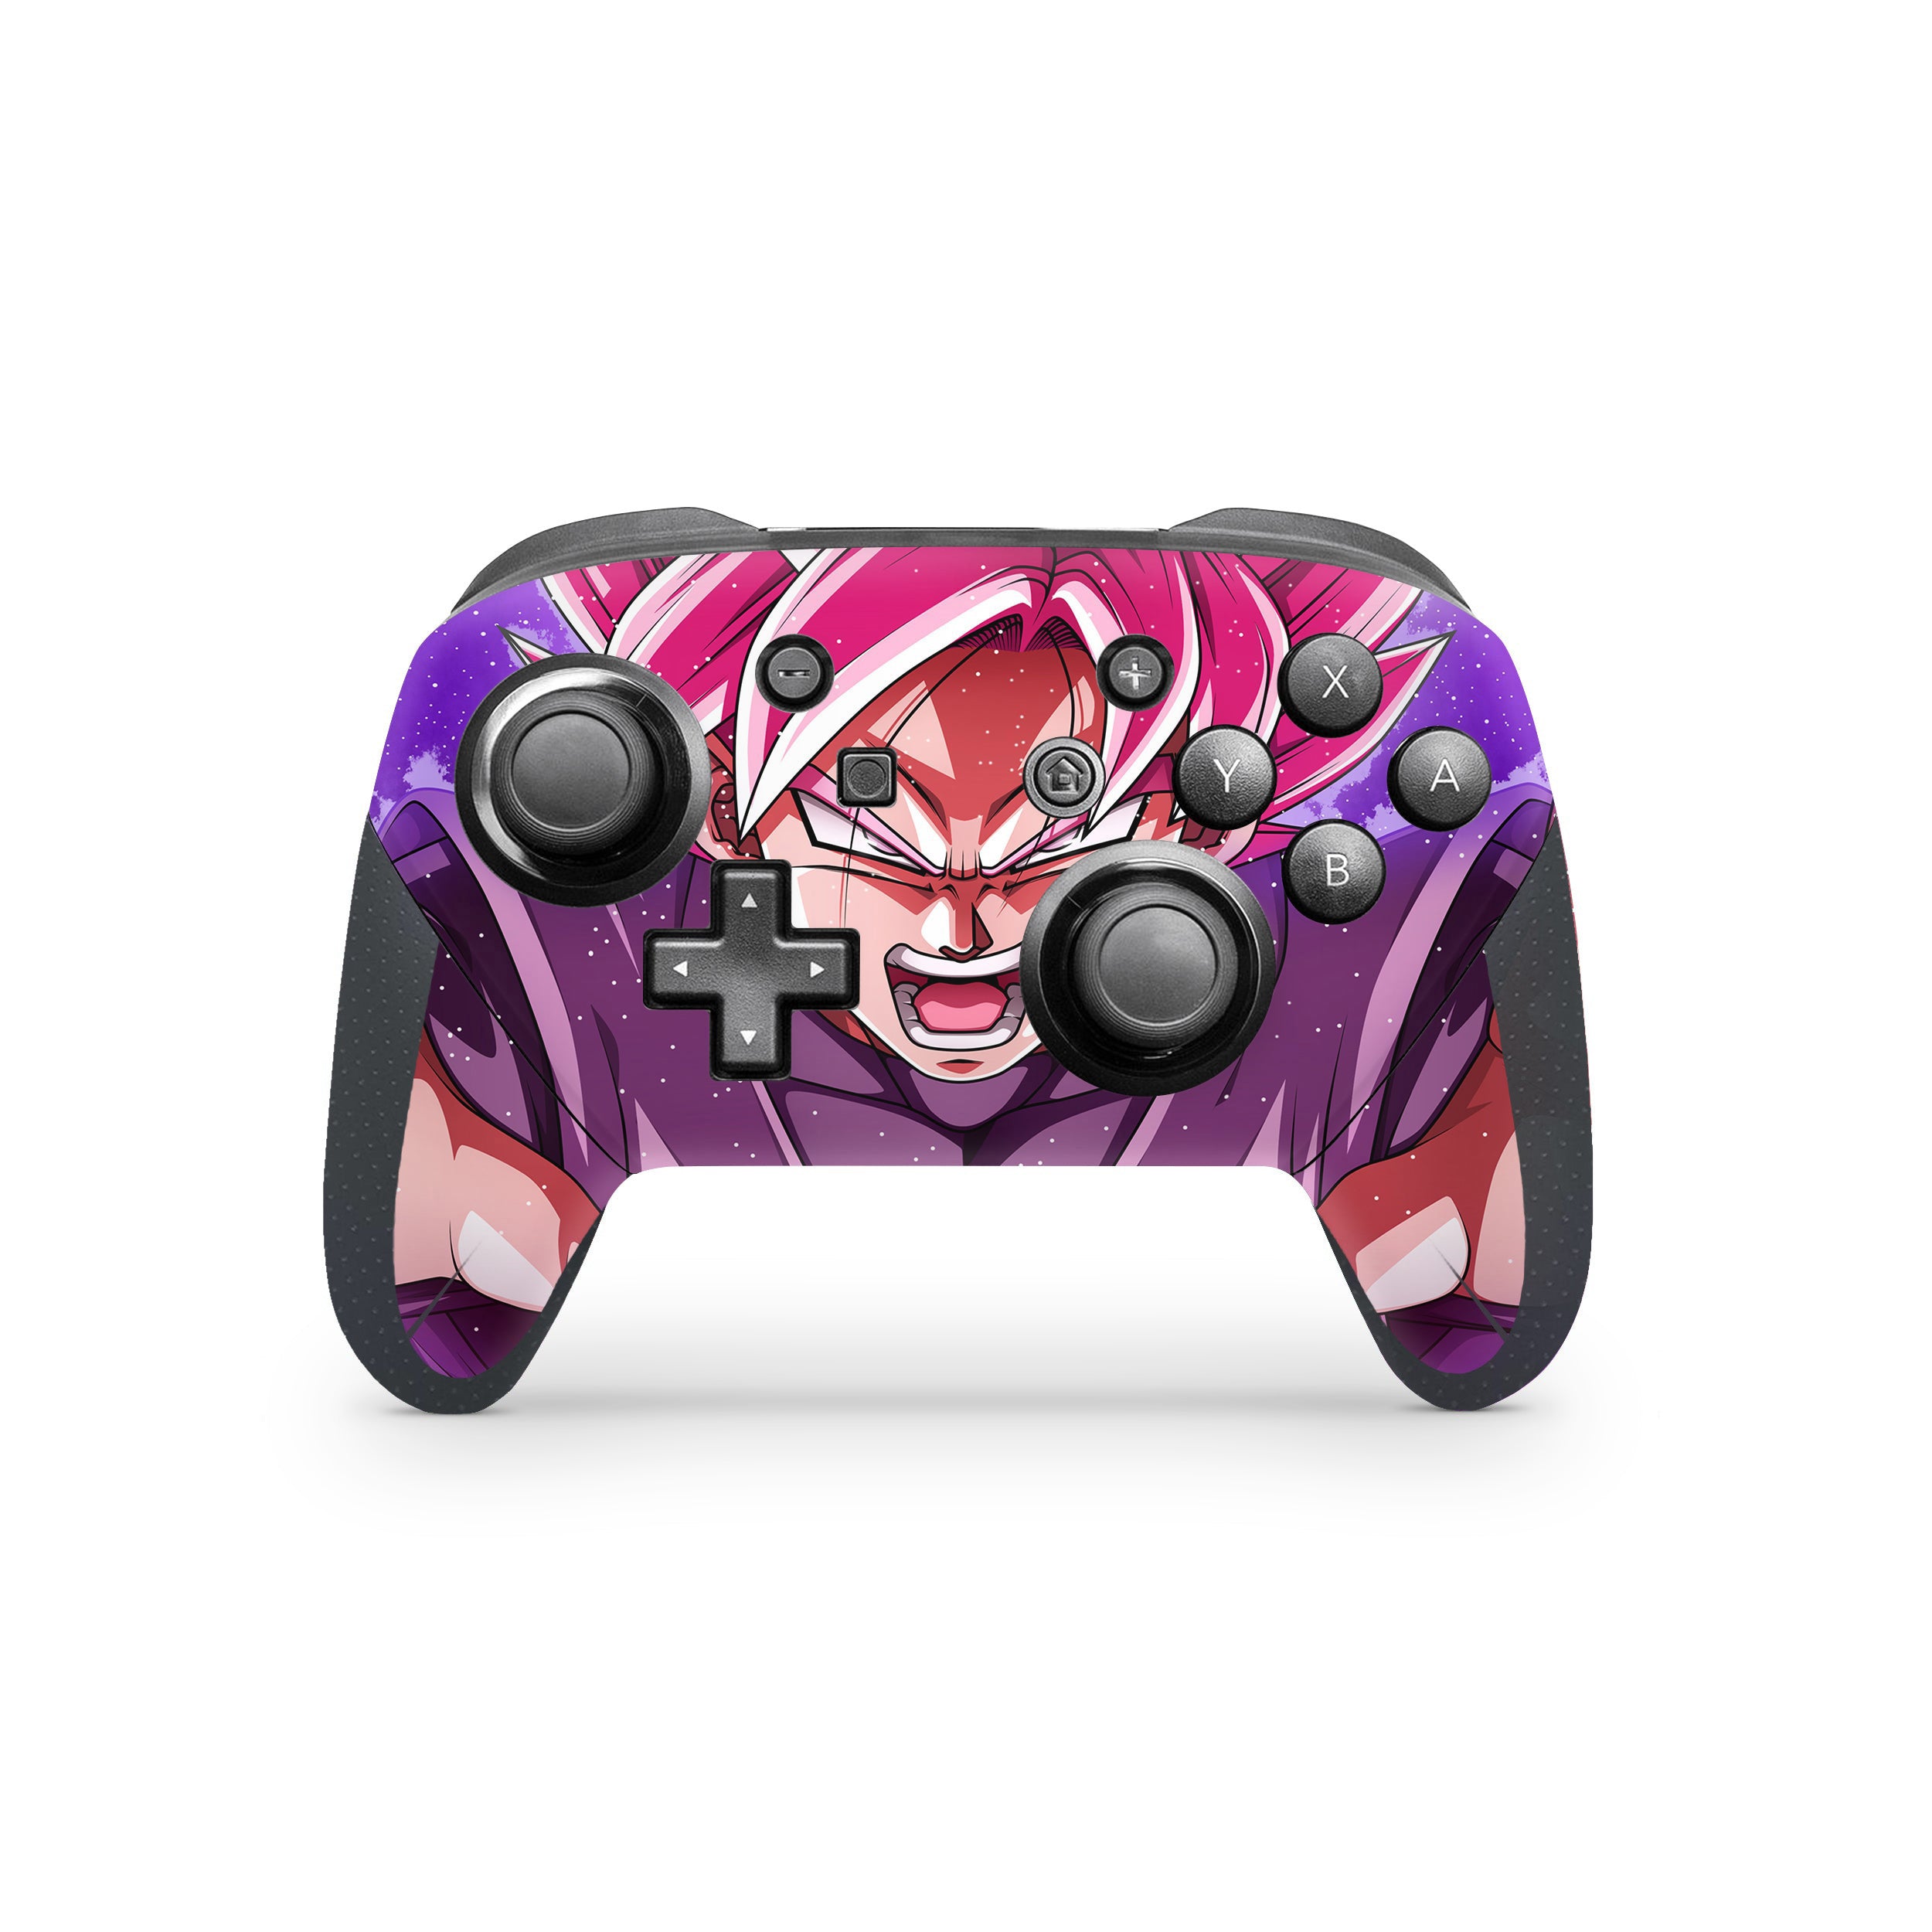 A video game skin featuring a Dragon Ball Super Goku design for the Switch Pro Controller.